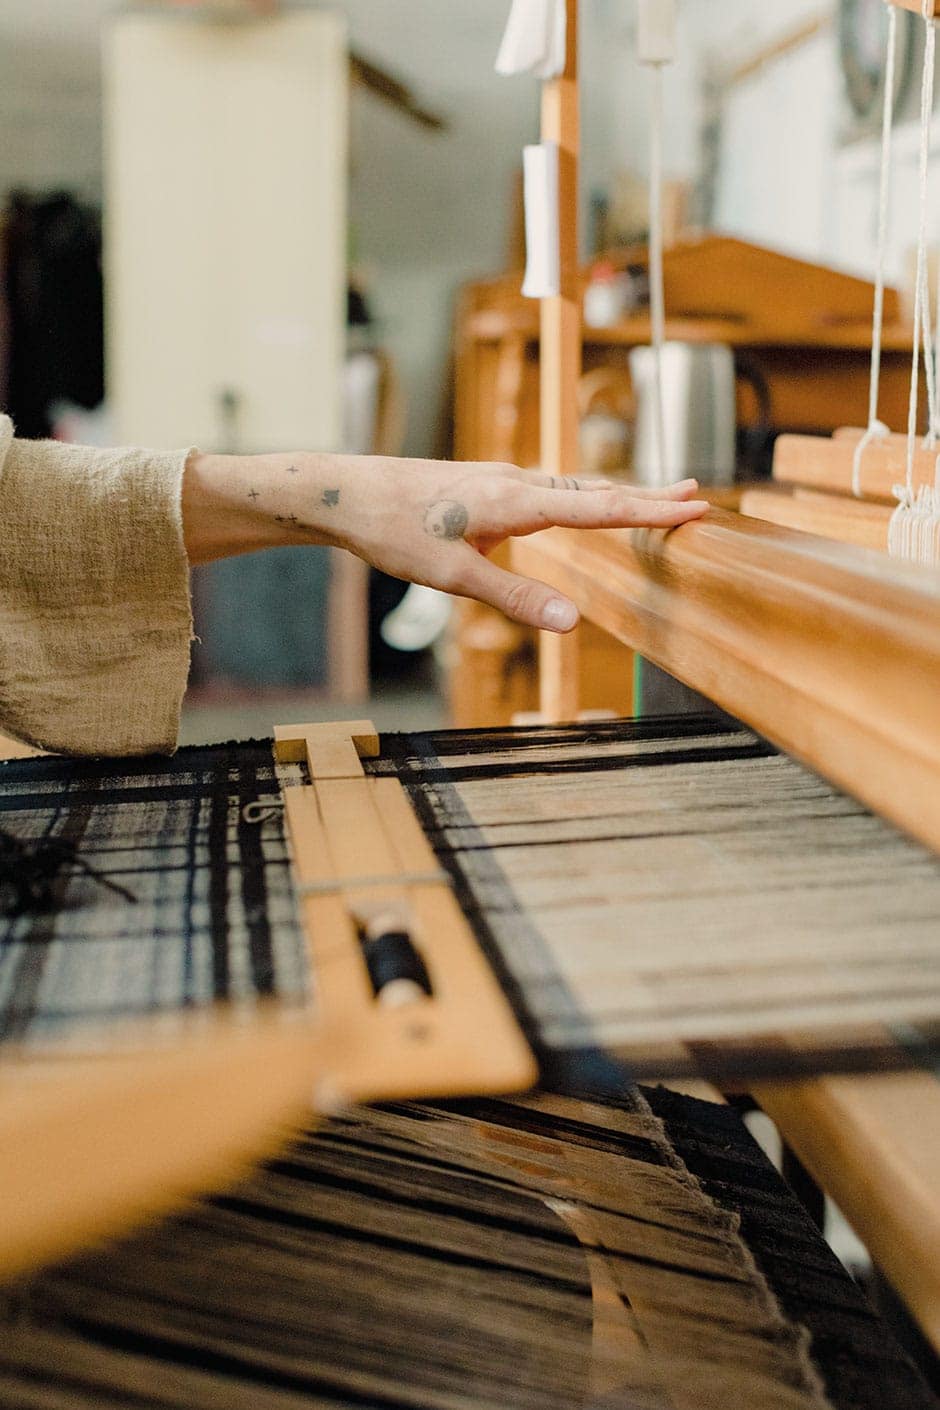 Contemporary weaver and textile artist Christopher Duncan on his intertwining life and art